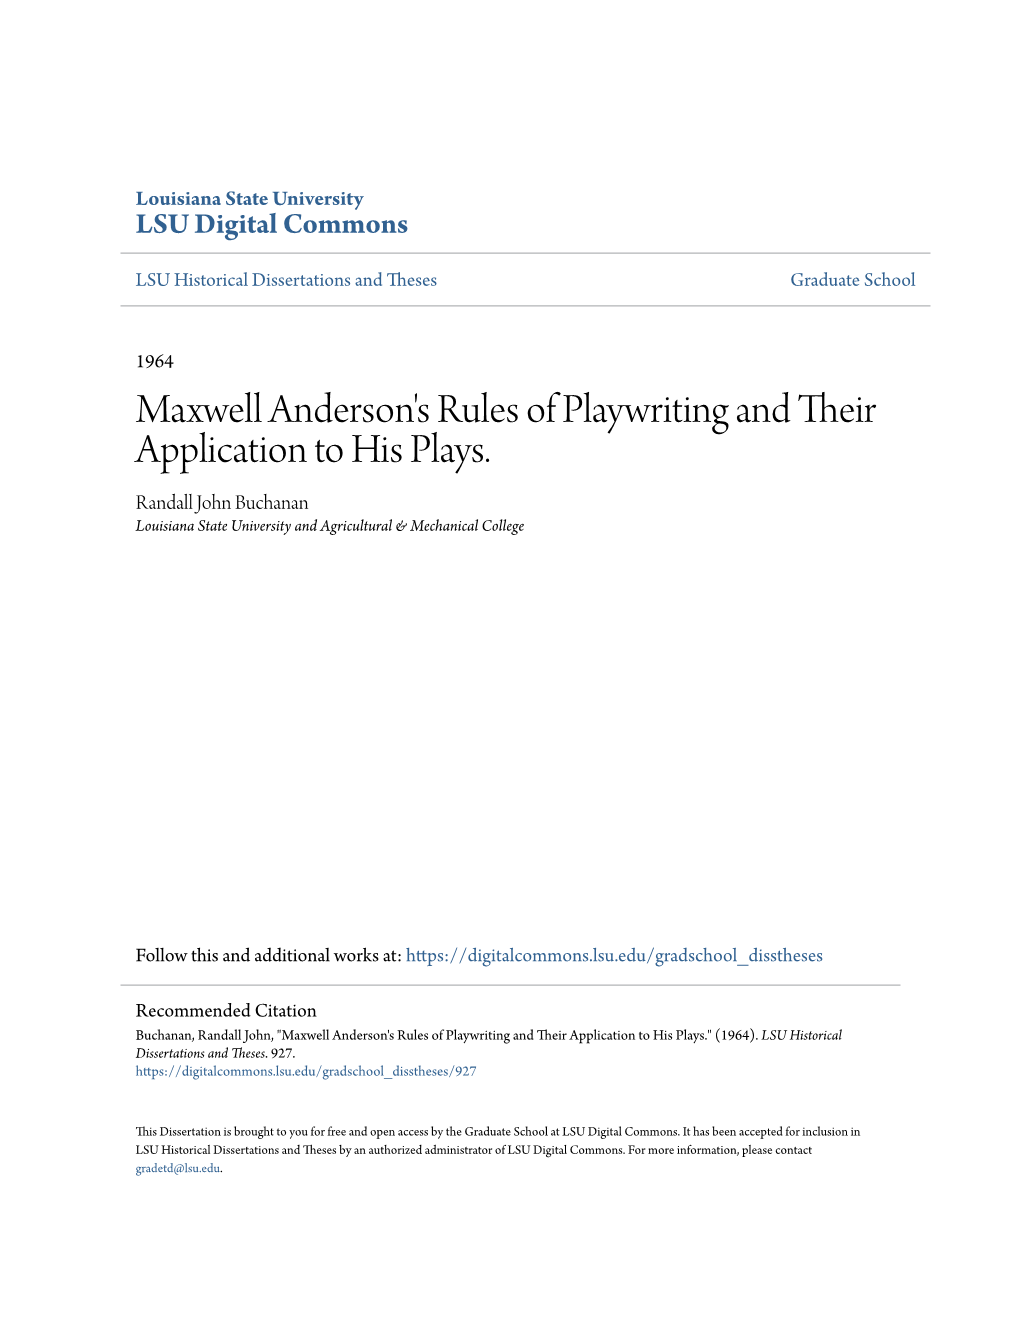 Maxwell Anderson's Rules of Playwriting and Their Application to His Plays. Randall John Buchanan Louisiana State University and Agricultural & Mechanical College